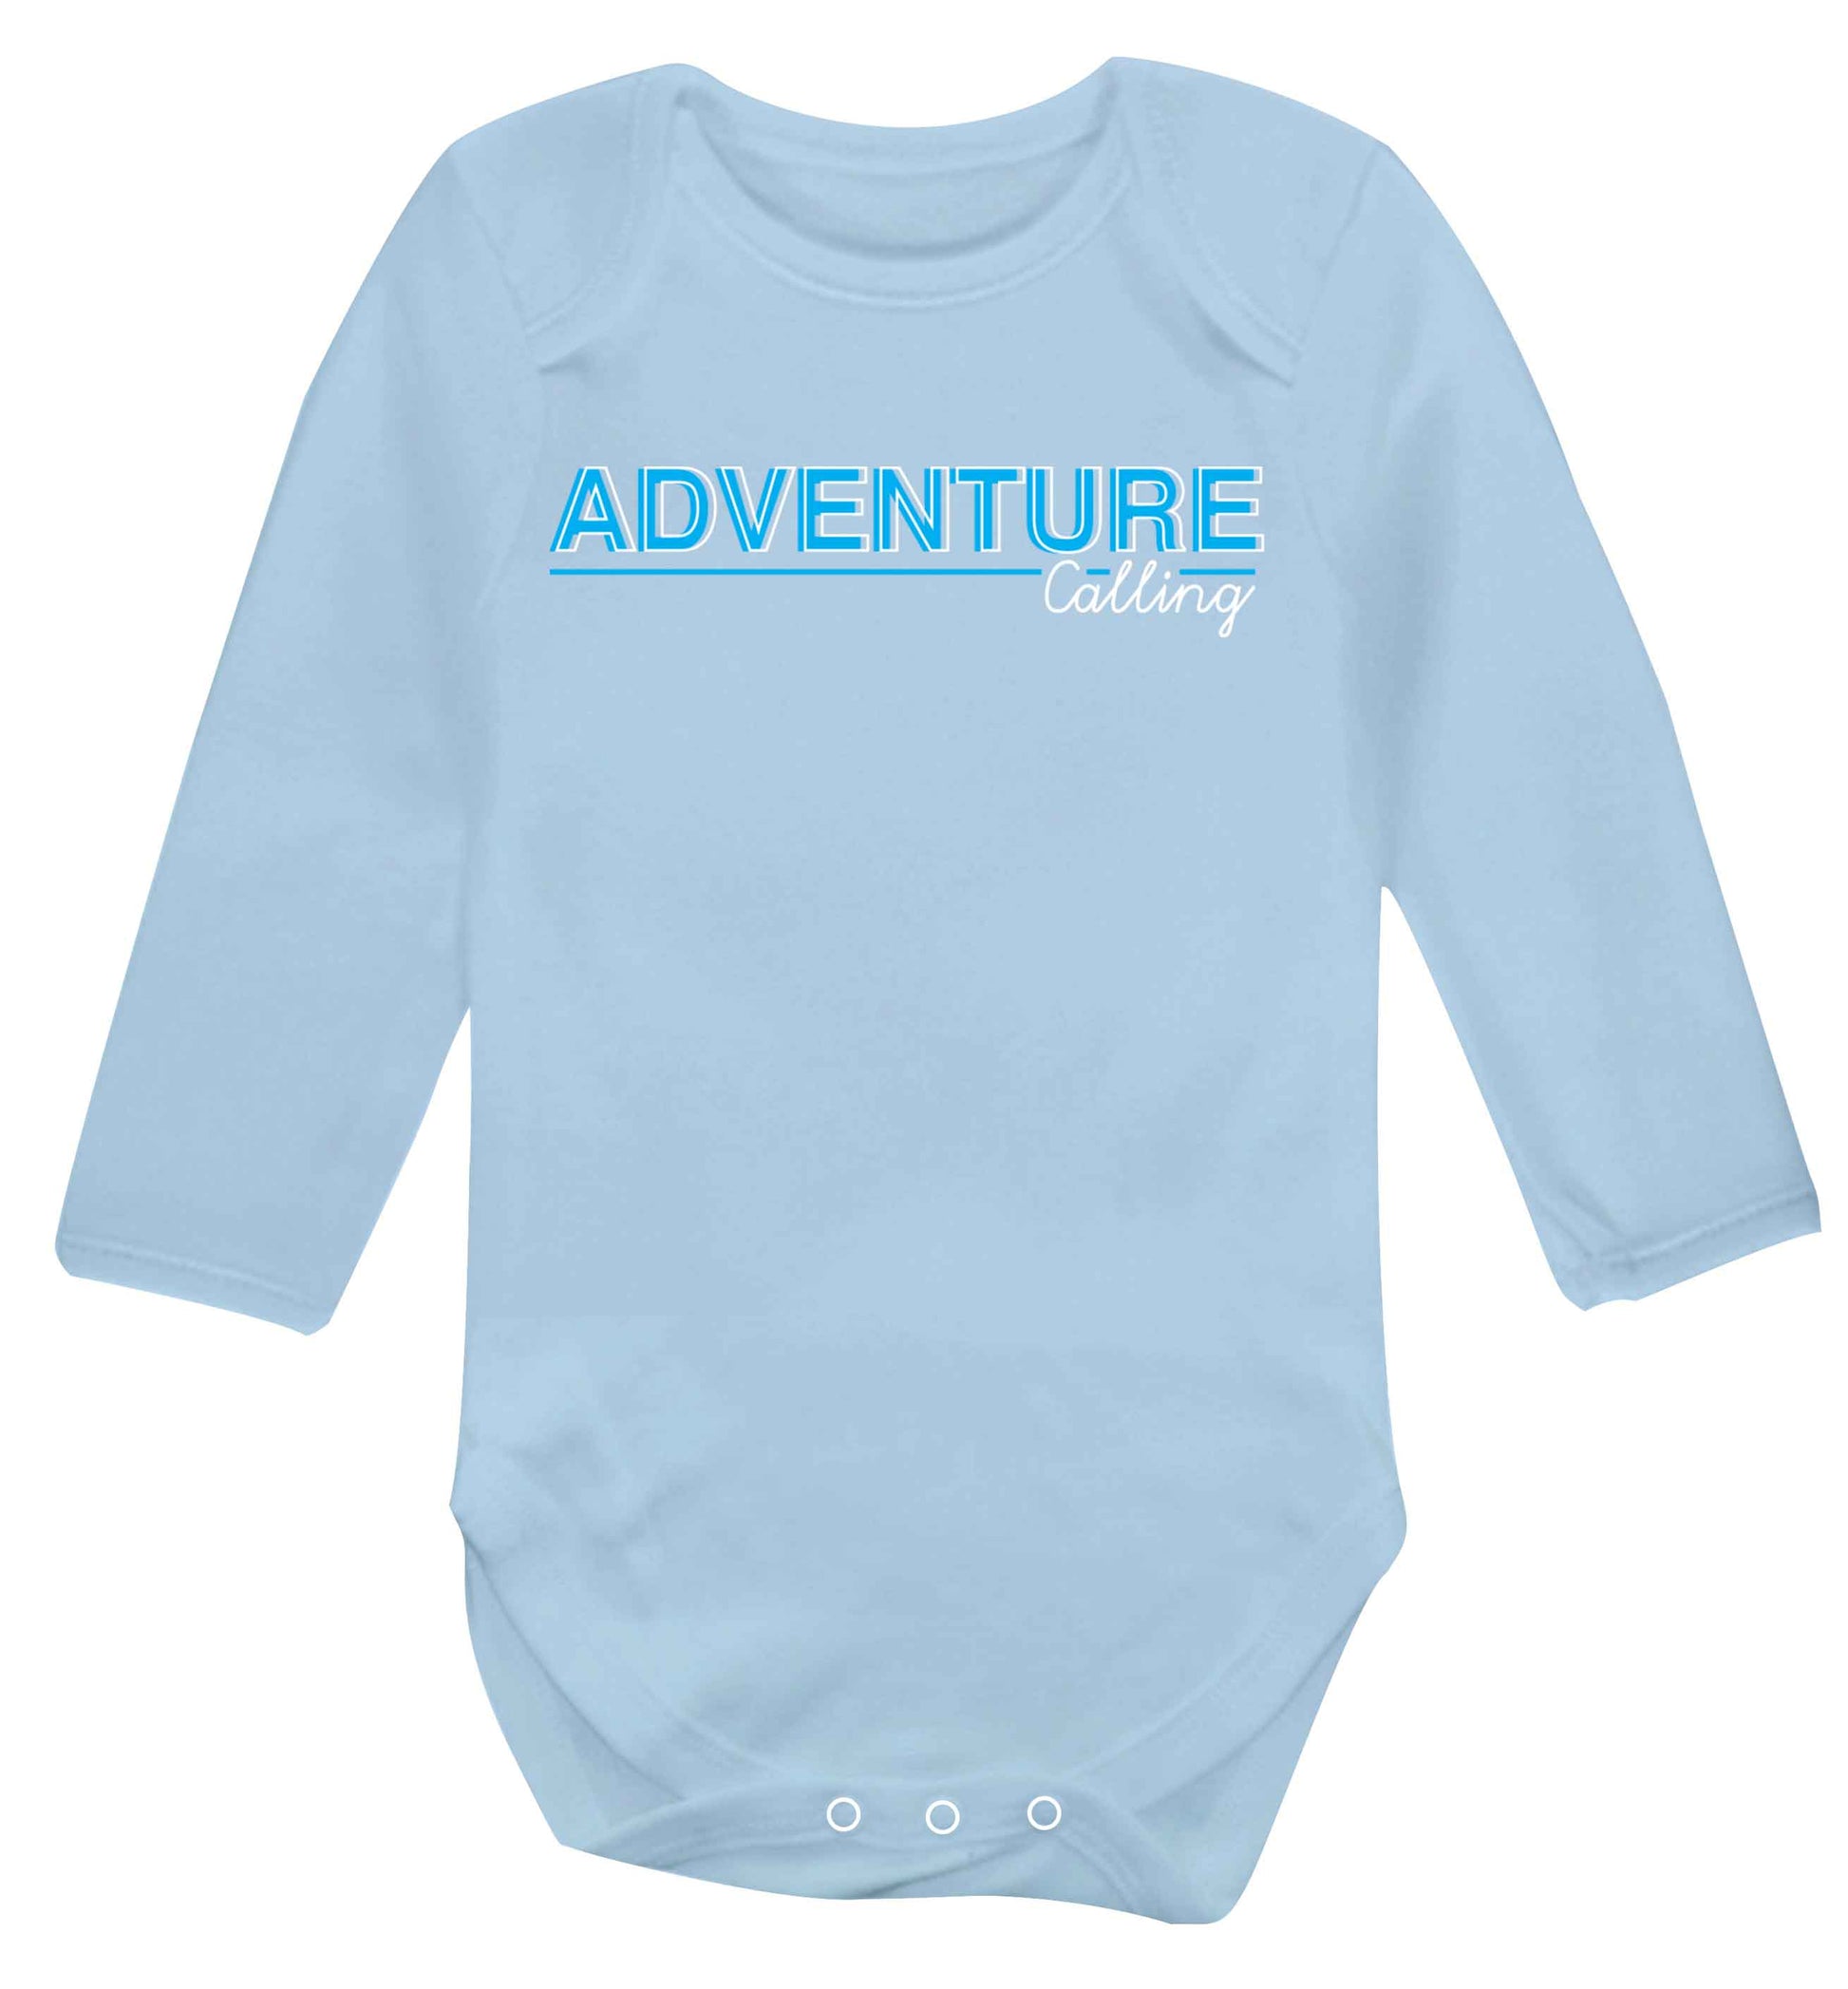 Adventure calling Baby Vest long sleeved pale blue 6-12 months